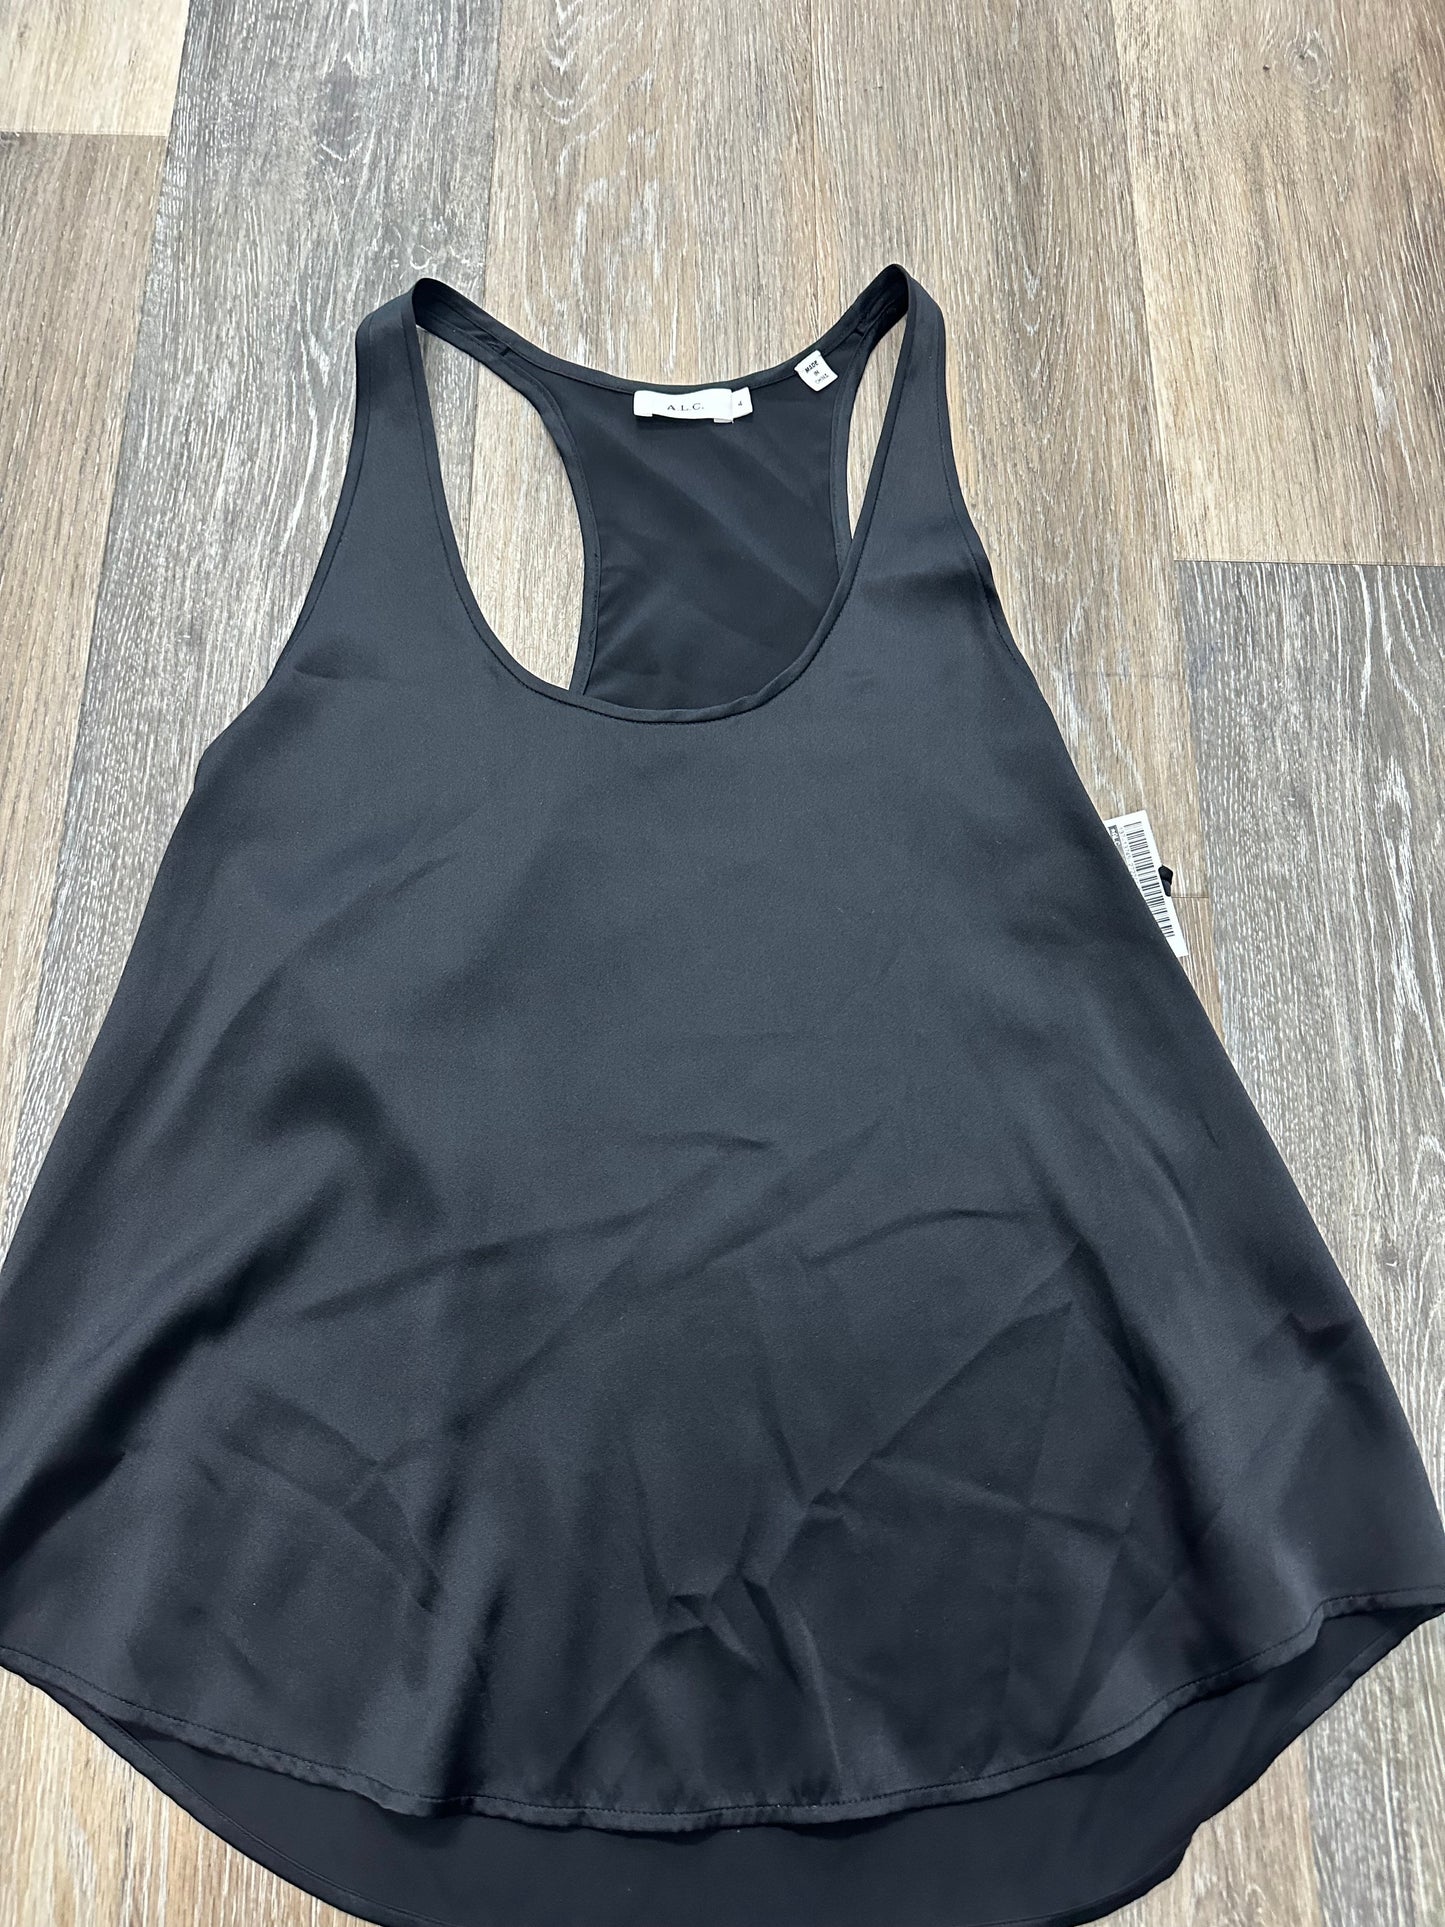 Top Sleeveless Designer By Alc  Size: 4